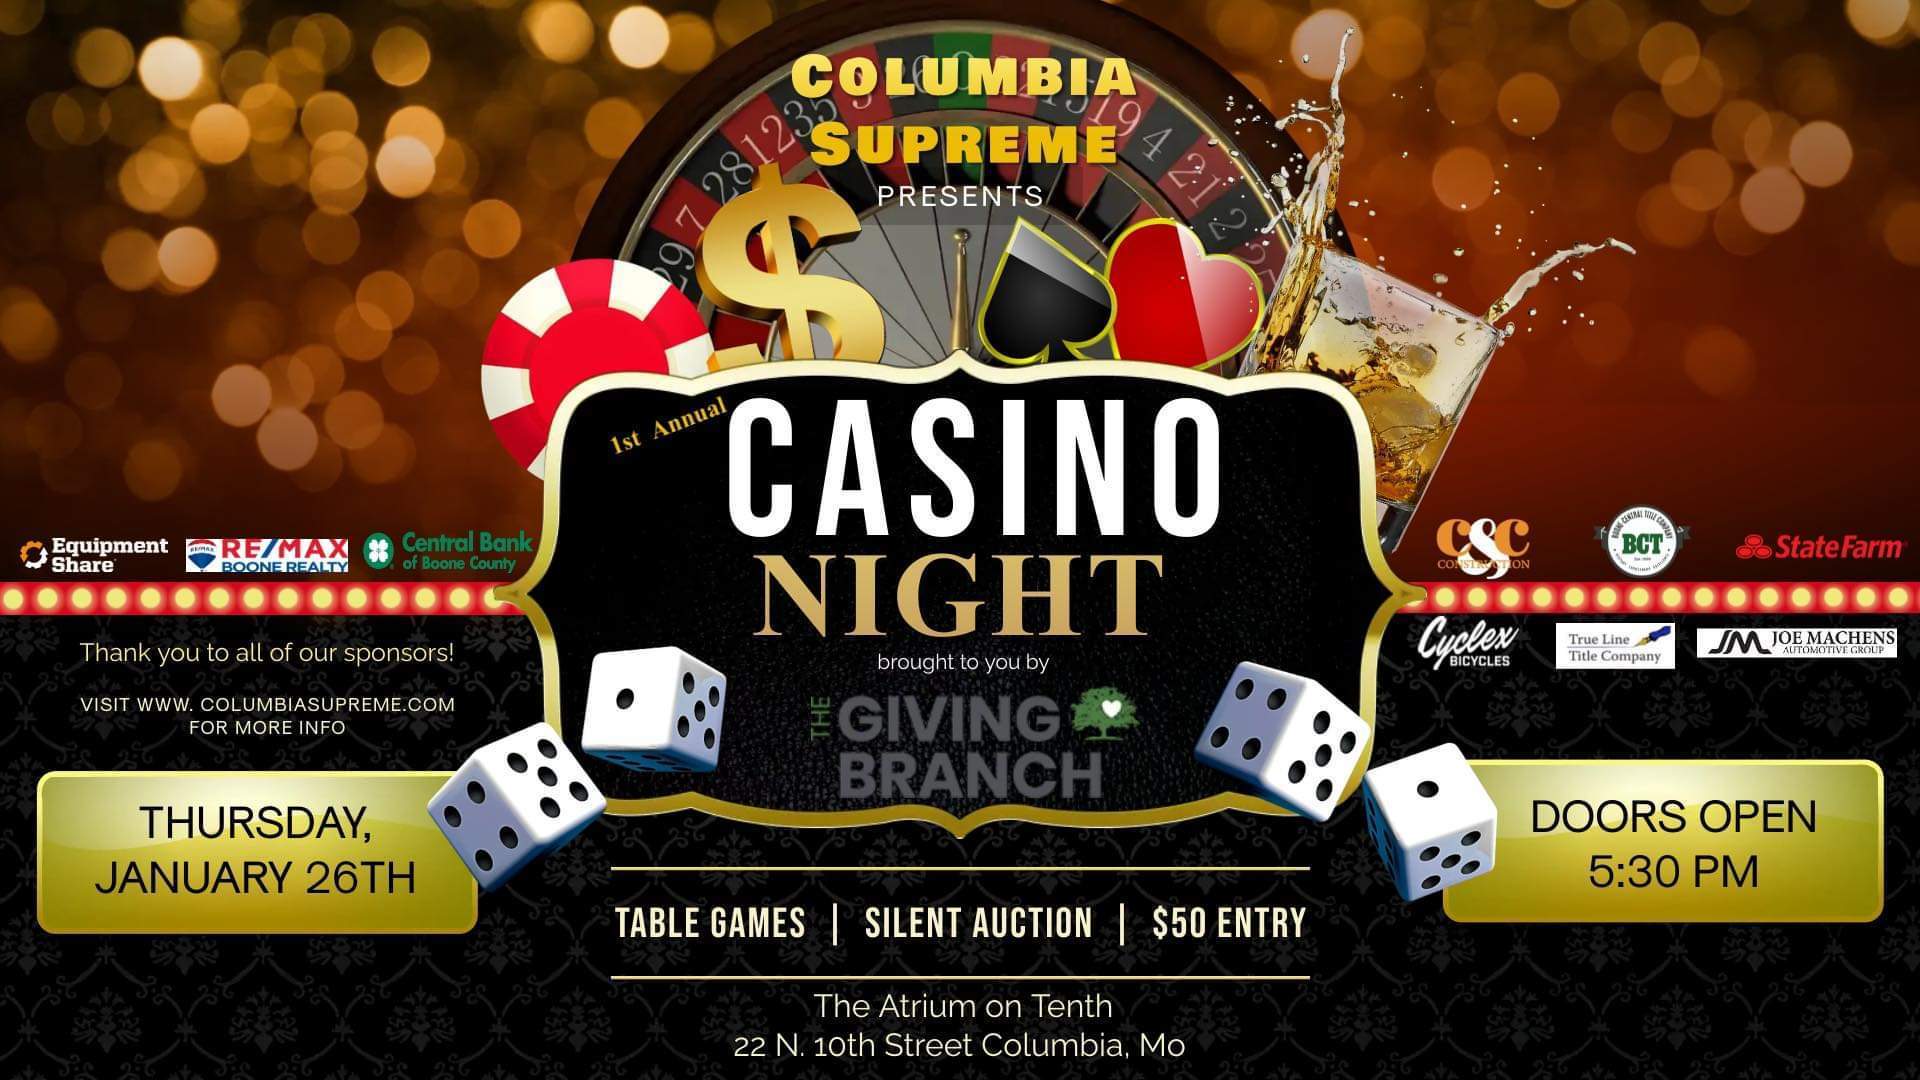 Columbia Supreme's 1st Annual Casino Night brought to you by The Giving Branch, Columbia, Missouri, United States